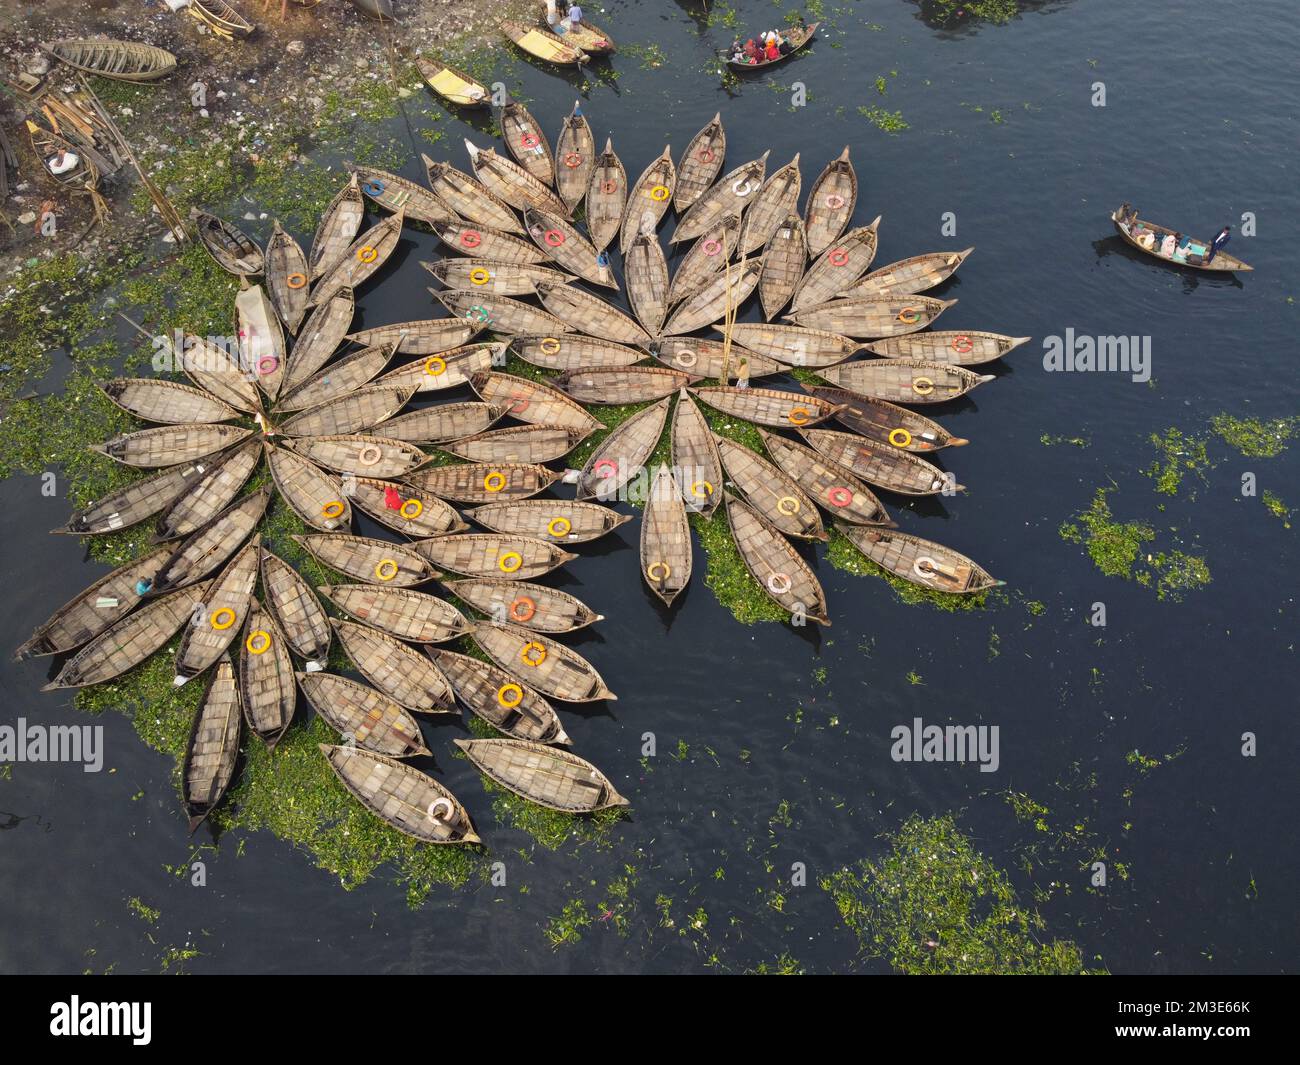 Dhaka, Bangladesh. 15th Dec, 2022. A fleet of wooden boats fans out around their moorings in the Buriganga River in Dhaka, Bangladesh. The river is widely used to transport goods, produce, and people. An estimated 50,000 commuters cross the Buriganga from Keraniganj to work in Dhaka, and many take boats. Hundreds of small boats, called 'Dinghy Noukas', are moored in the river port of Dhaka, the capital of Bangladesh. In them, ferrymen transport workers, goods, and tourists across the Buriganga River every day. Credit: Joy Saha/Alamy Live News Stock Photo